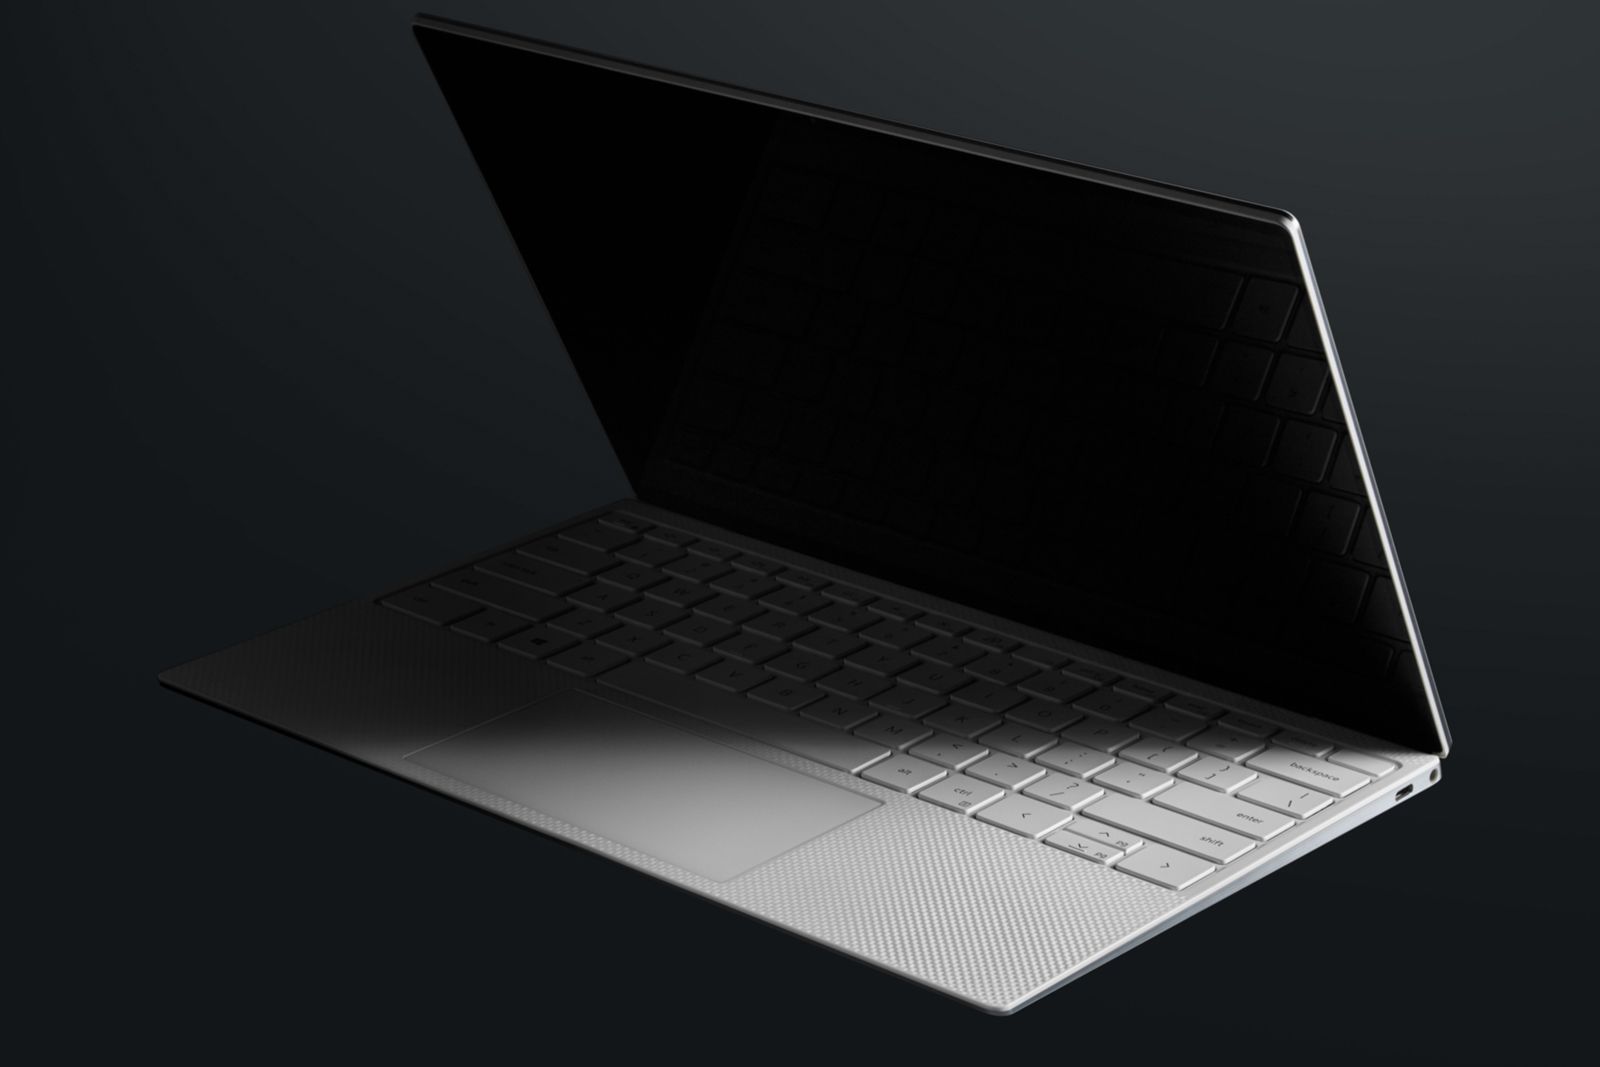 Dell teases the upcoming XPS 13 2-in-1 using Intel's new Evo platform photo 2